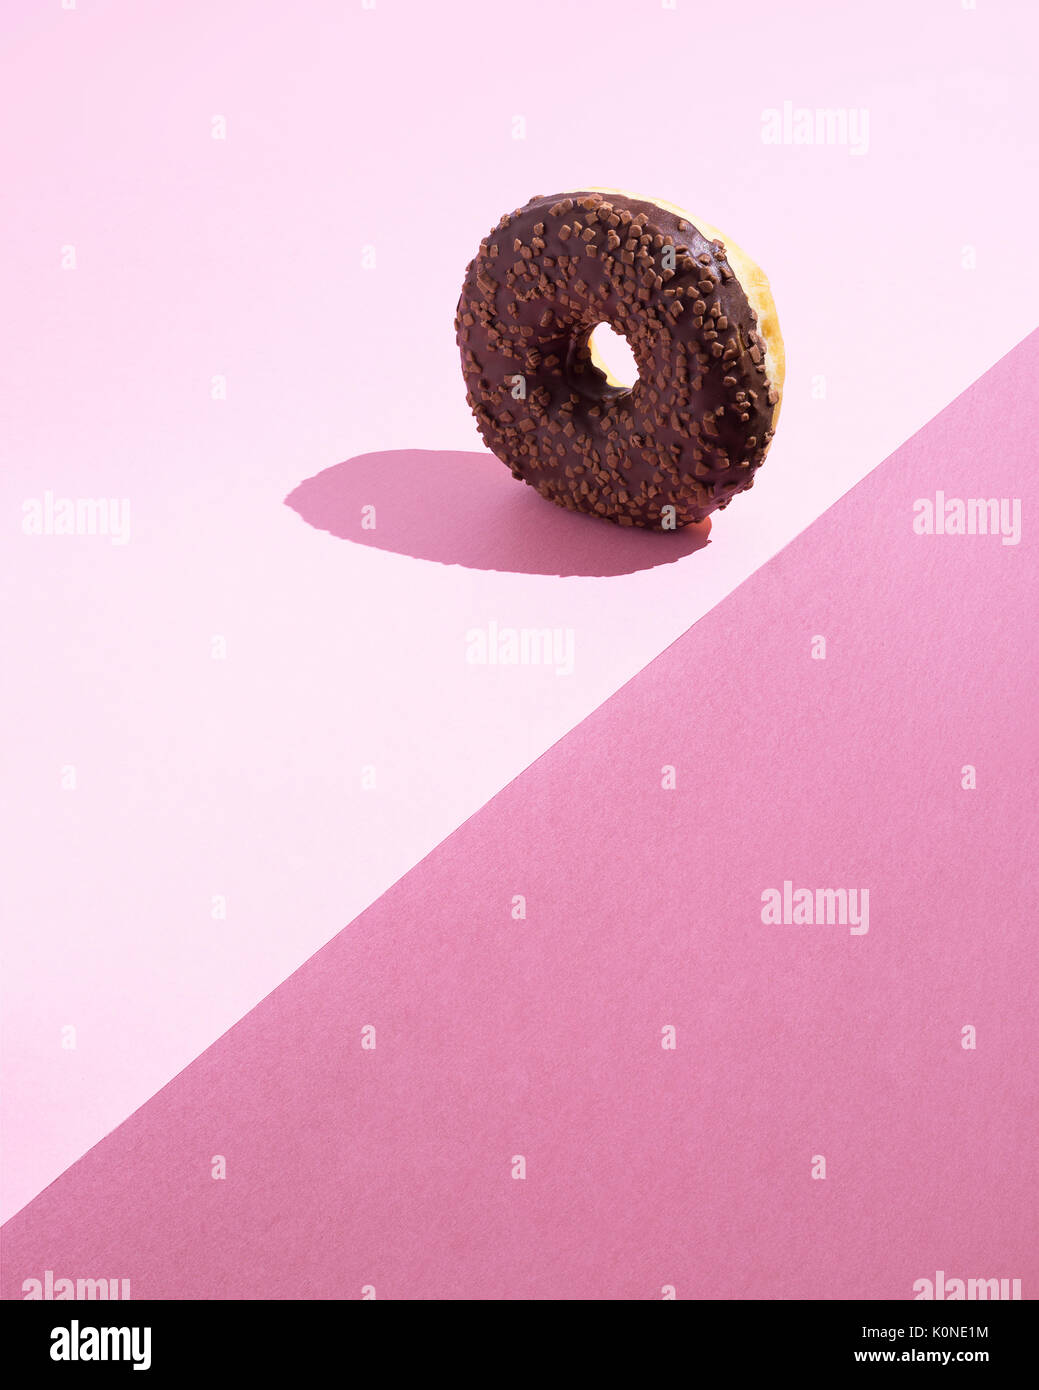 Doughnut with chocolate icing on pink ground Stock Photo